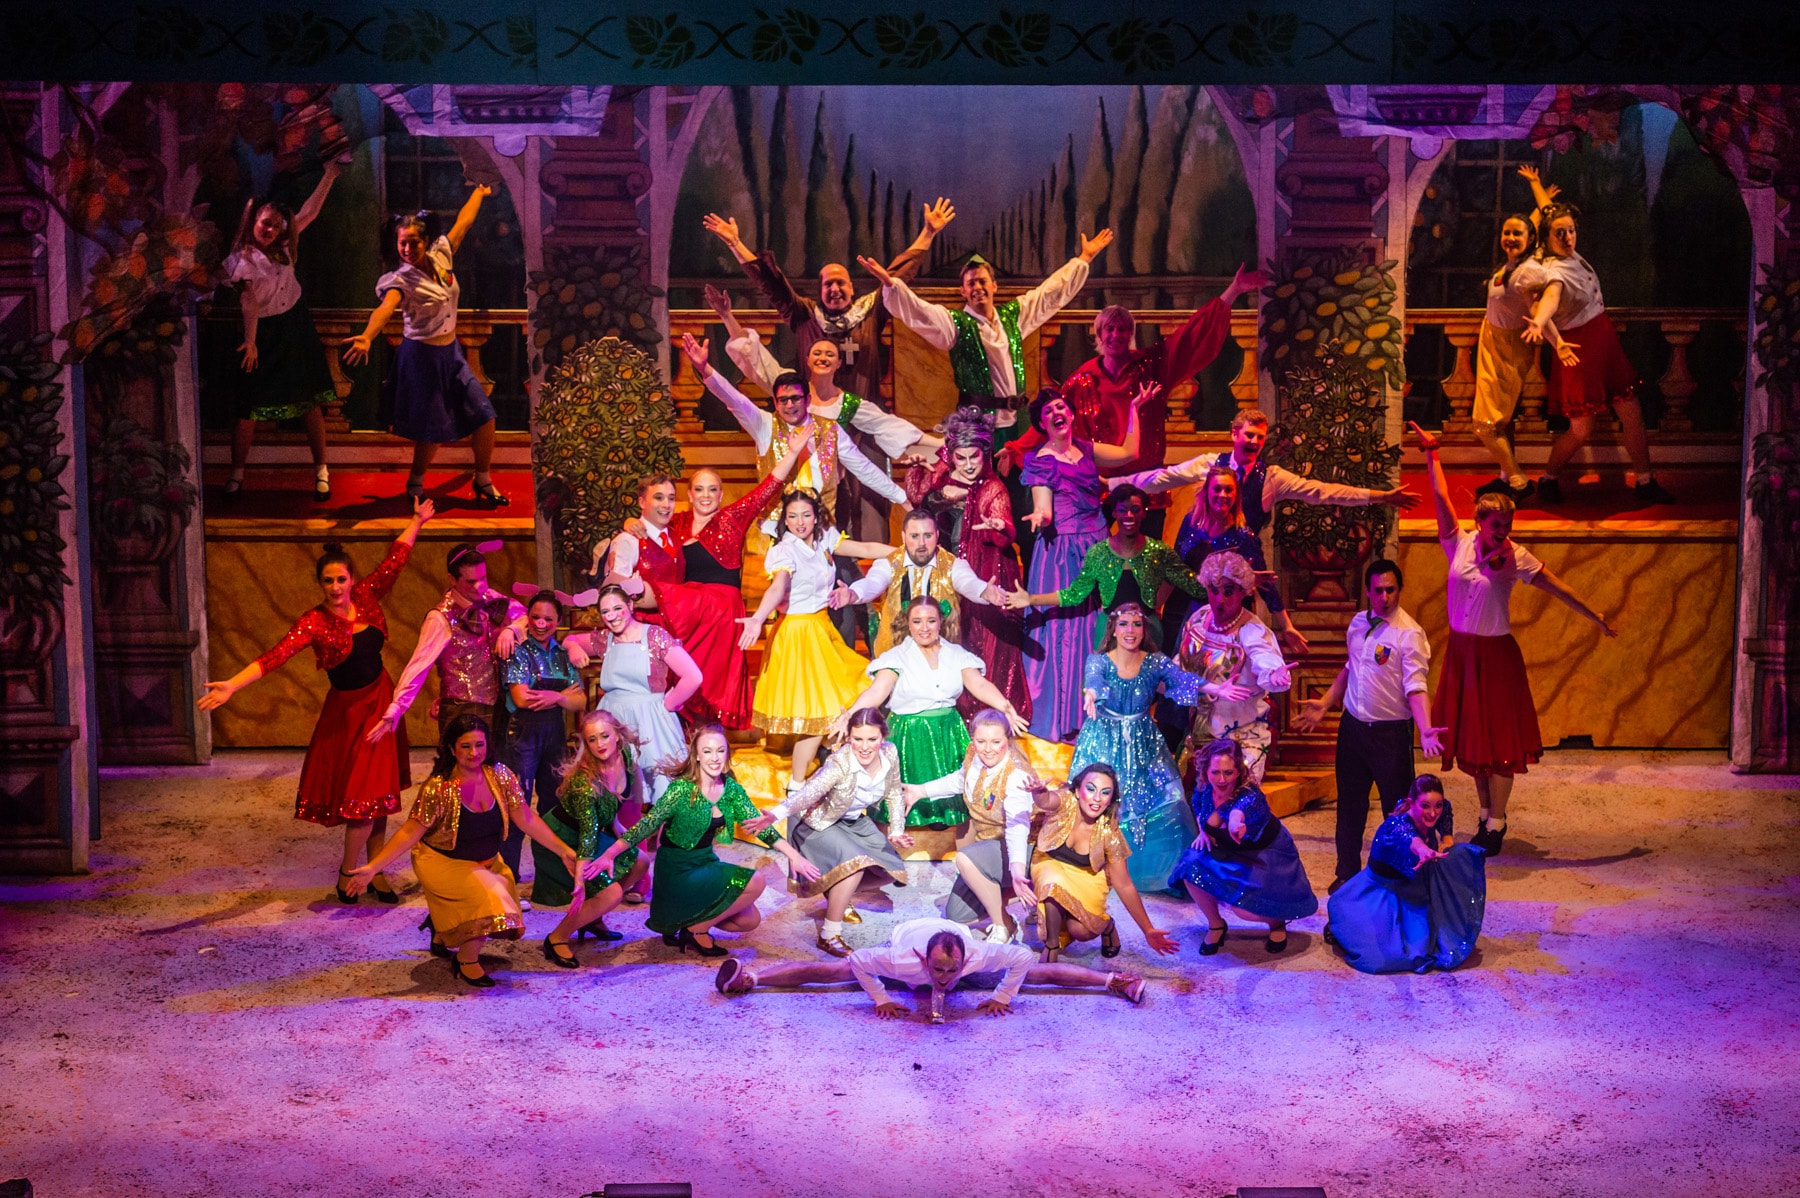 Hansel & Gretel Pantomime – The Peacock Theatre, West End